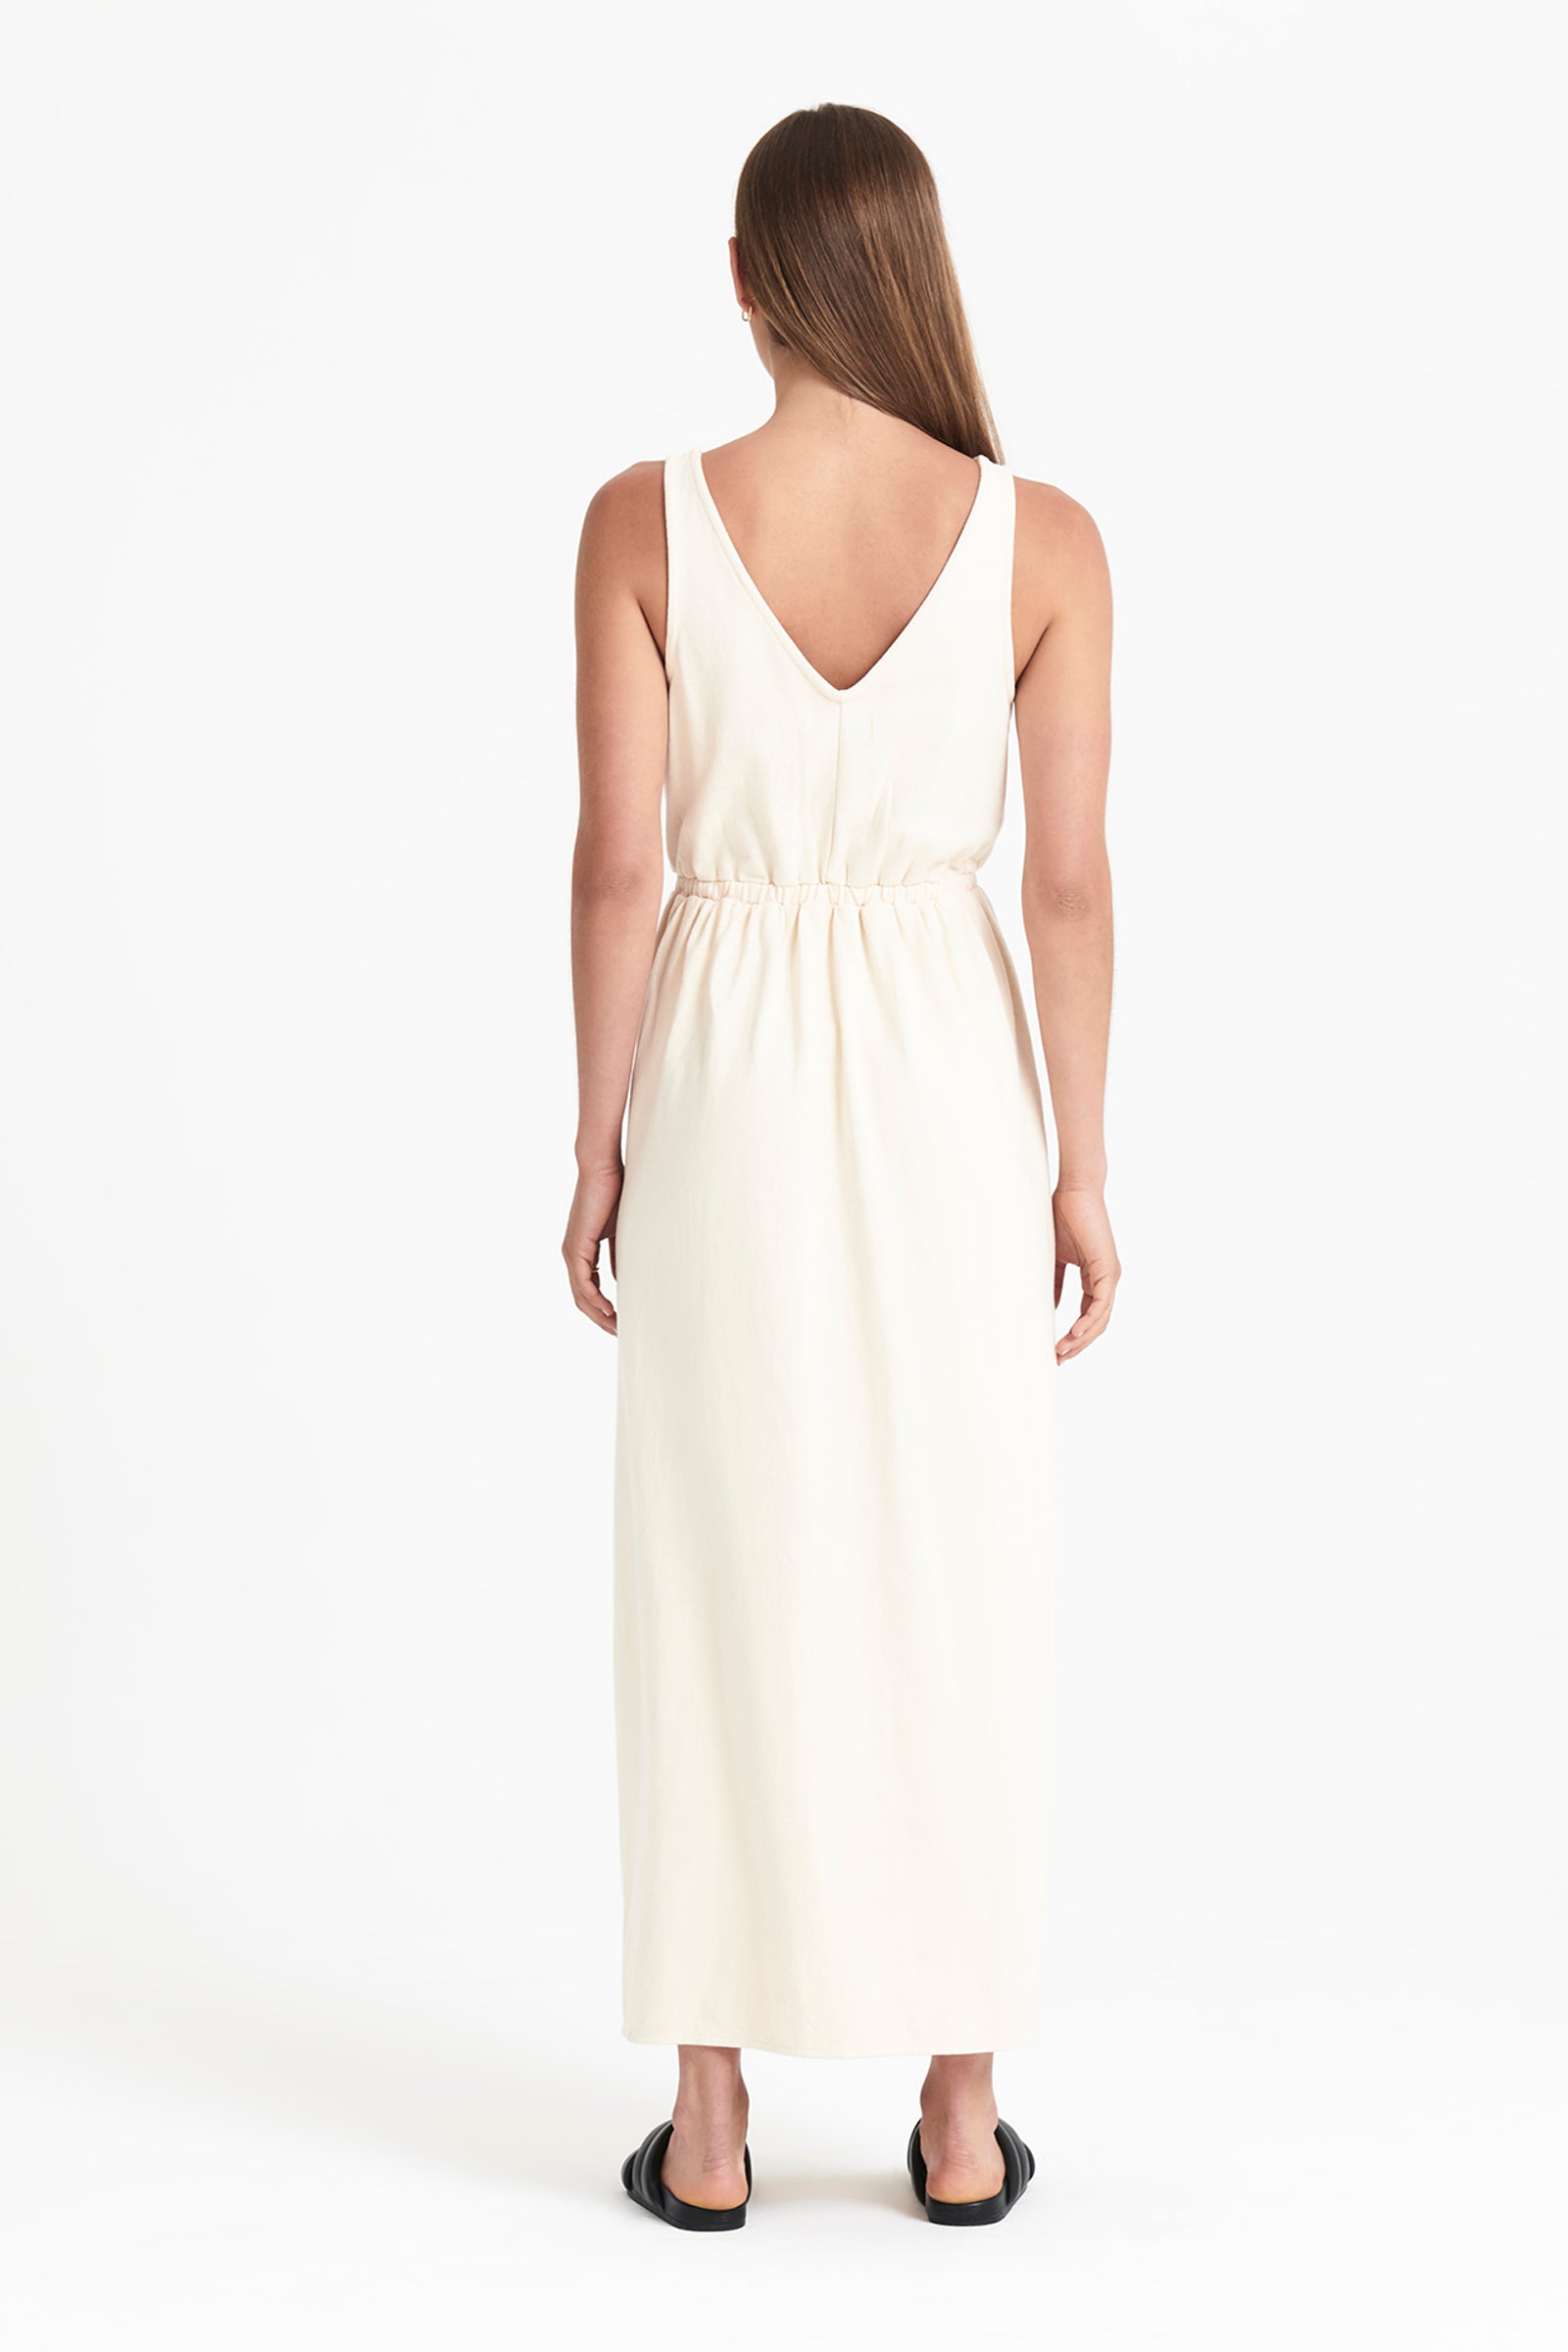 Nude Lucy Fes Maxi Dress in White Cloud